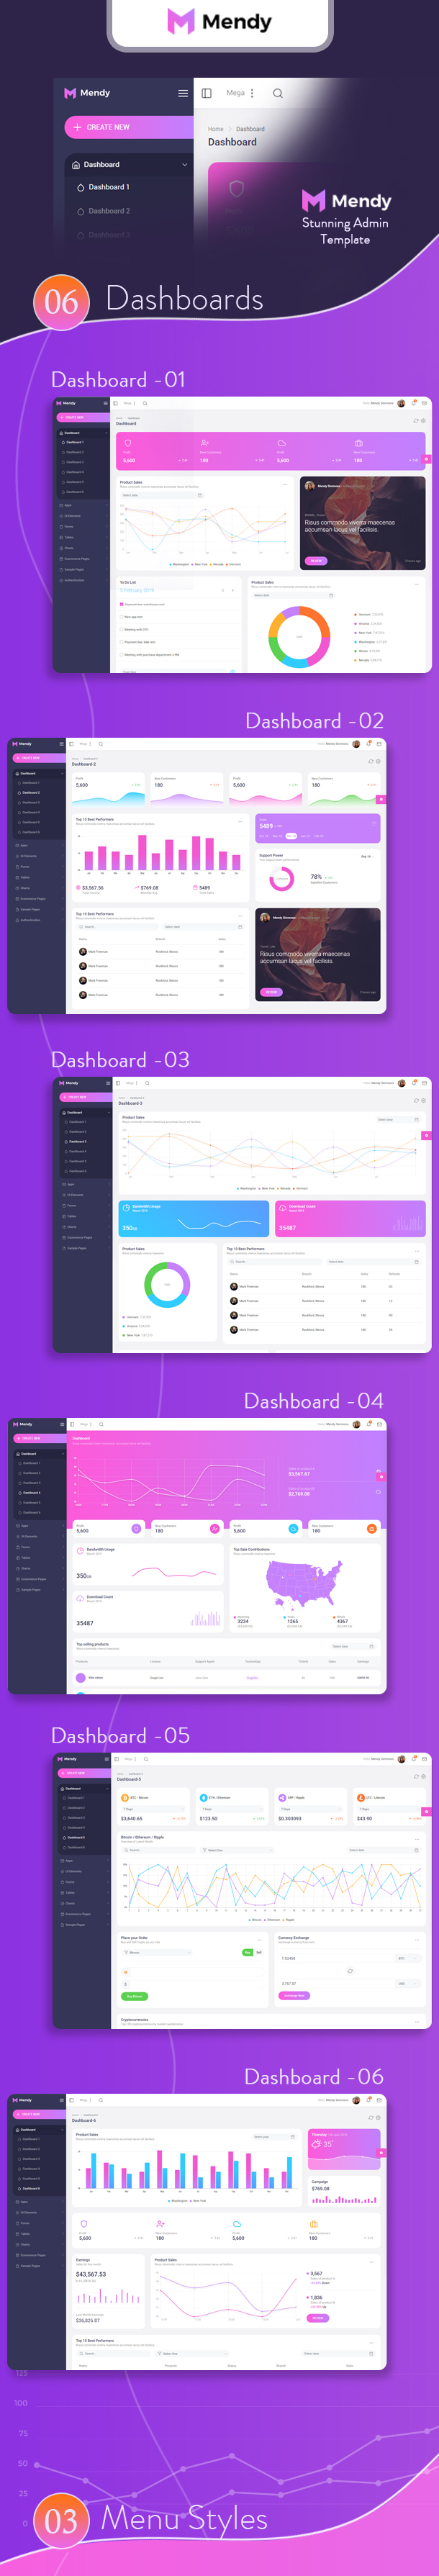 Mendy Admin Template - Dashboard + UI Kit Framework with Frontend Templates (Bootstrap 4) - 1